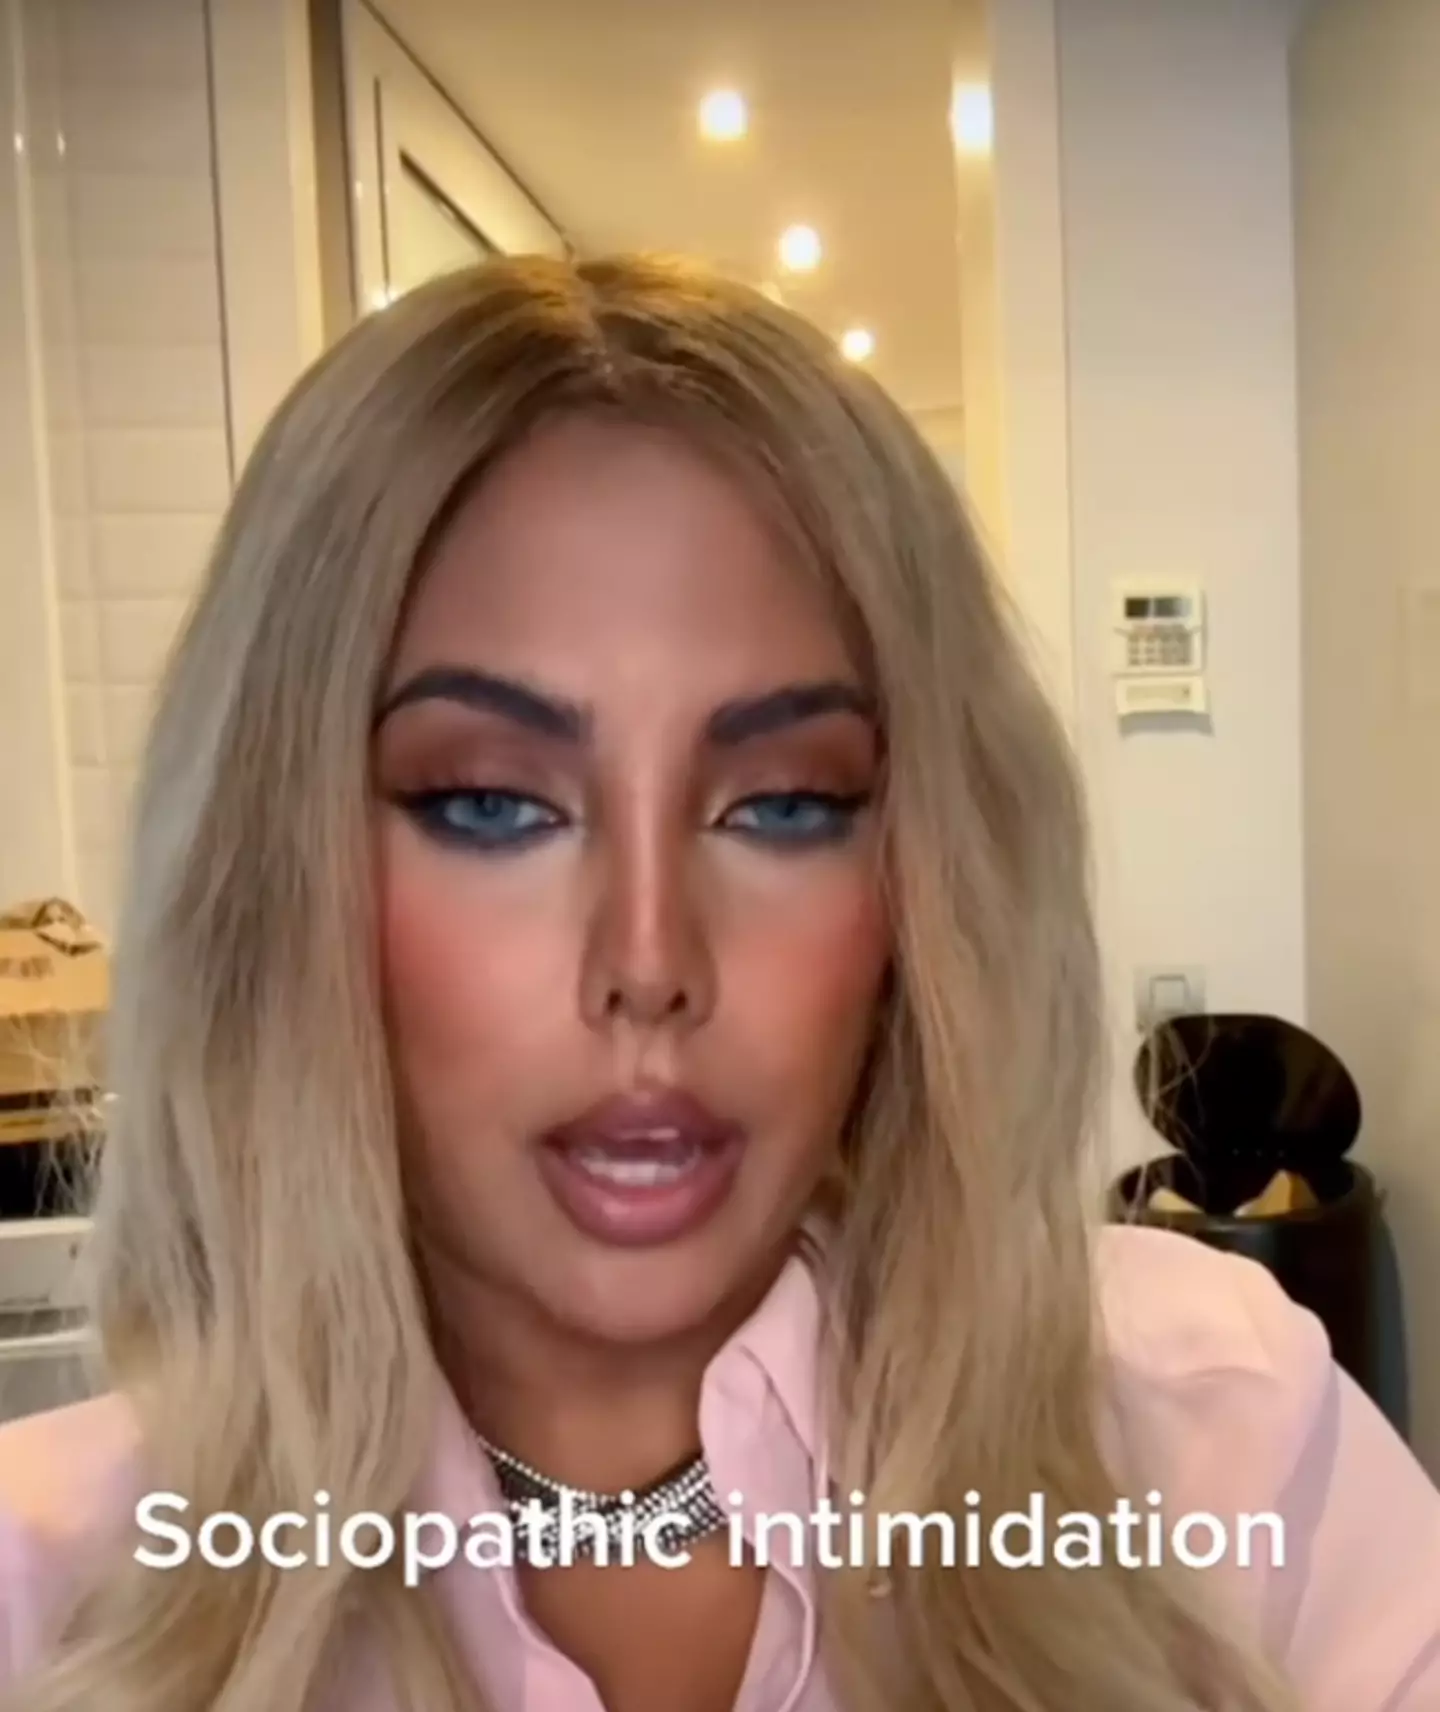 A diagnosed sociopath has broken down how she intimidates people.